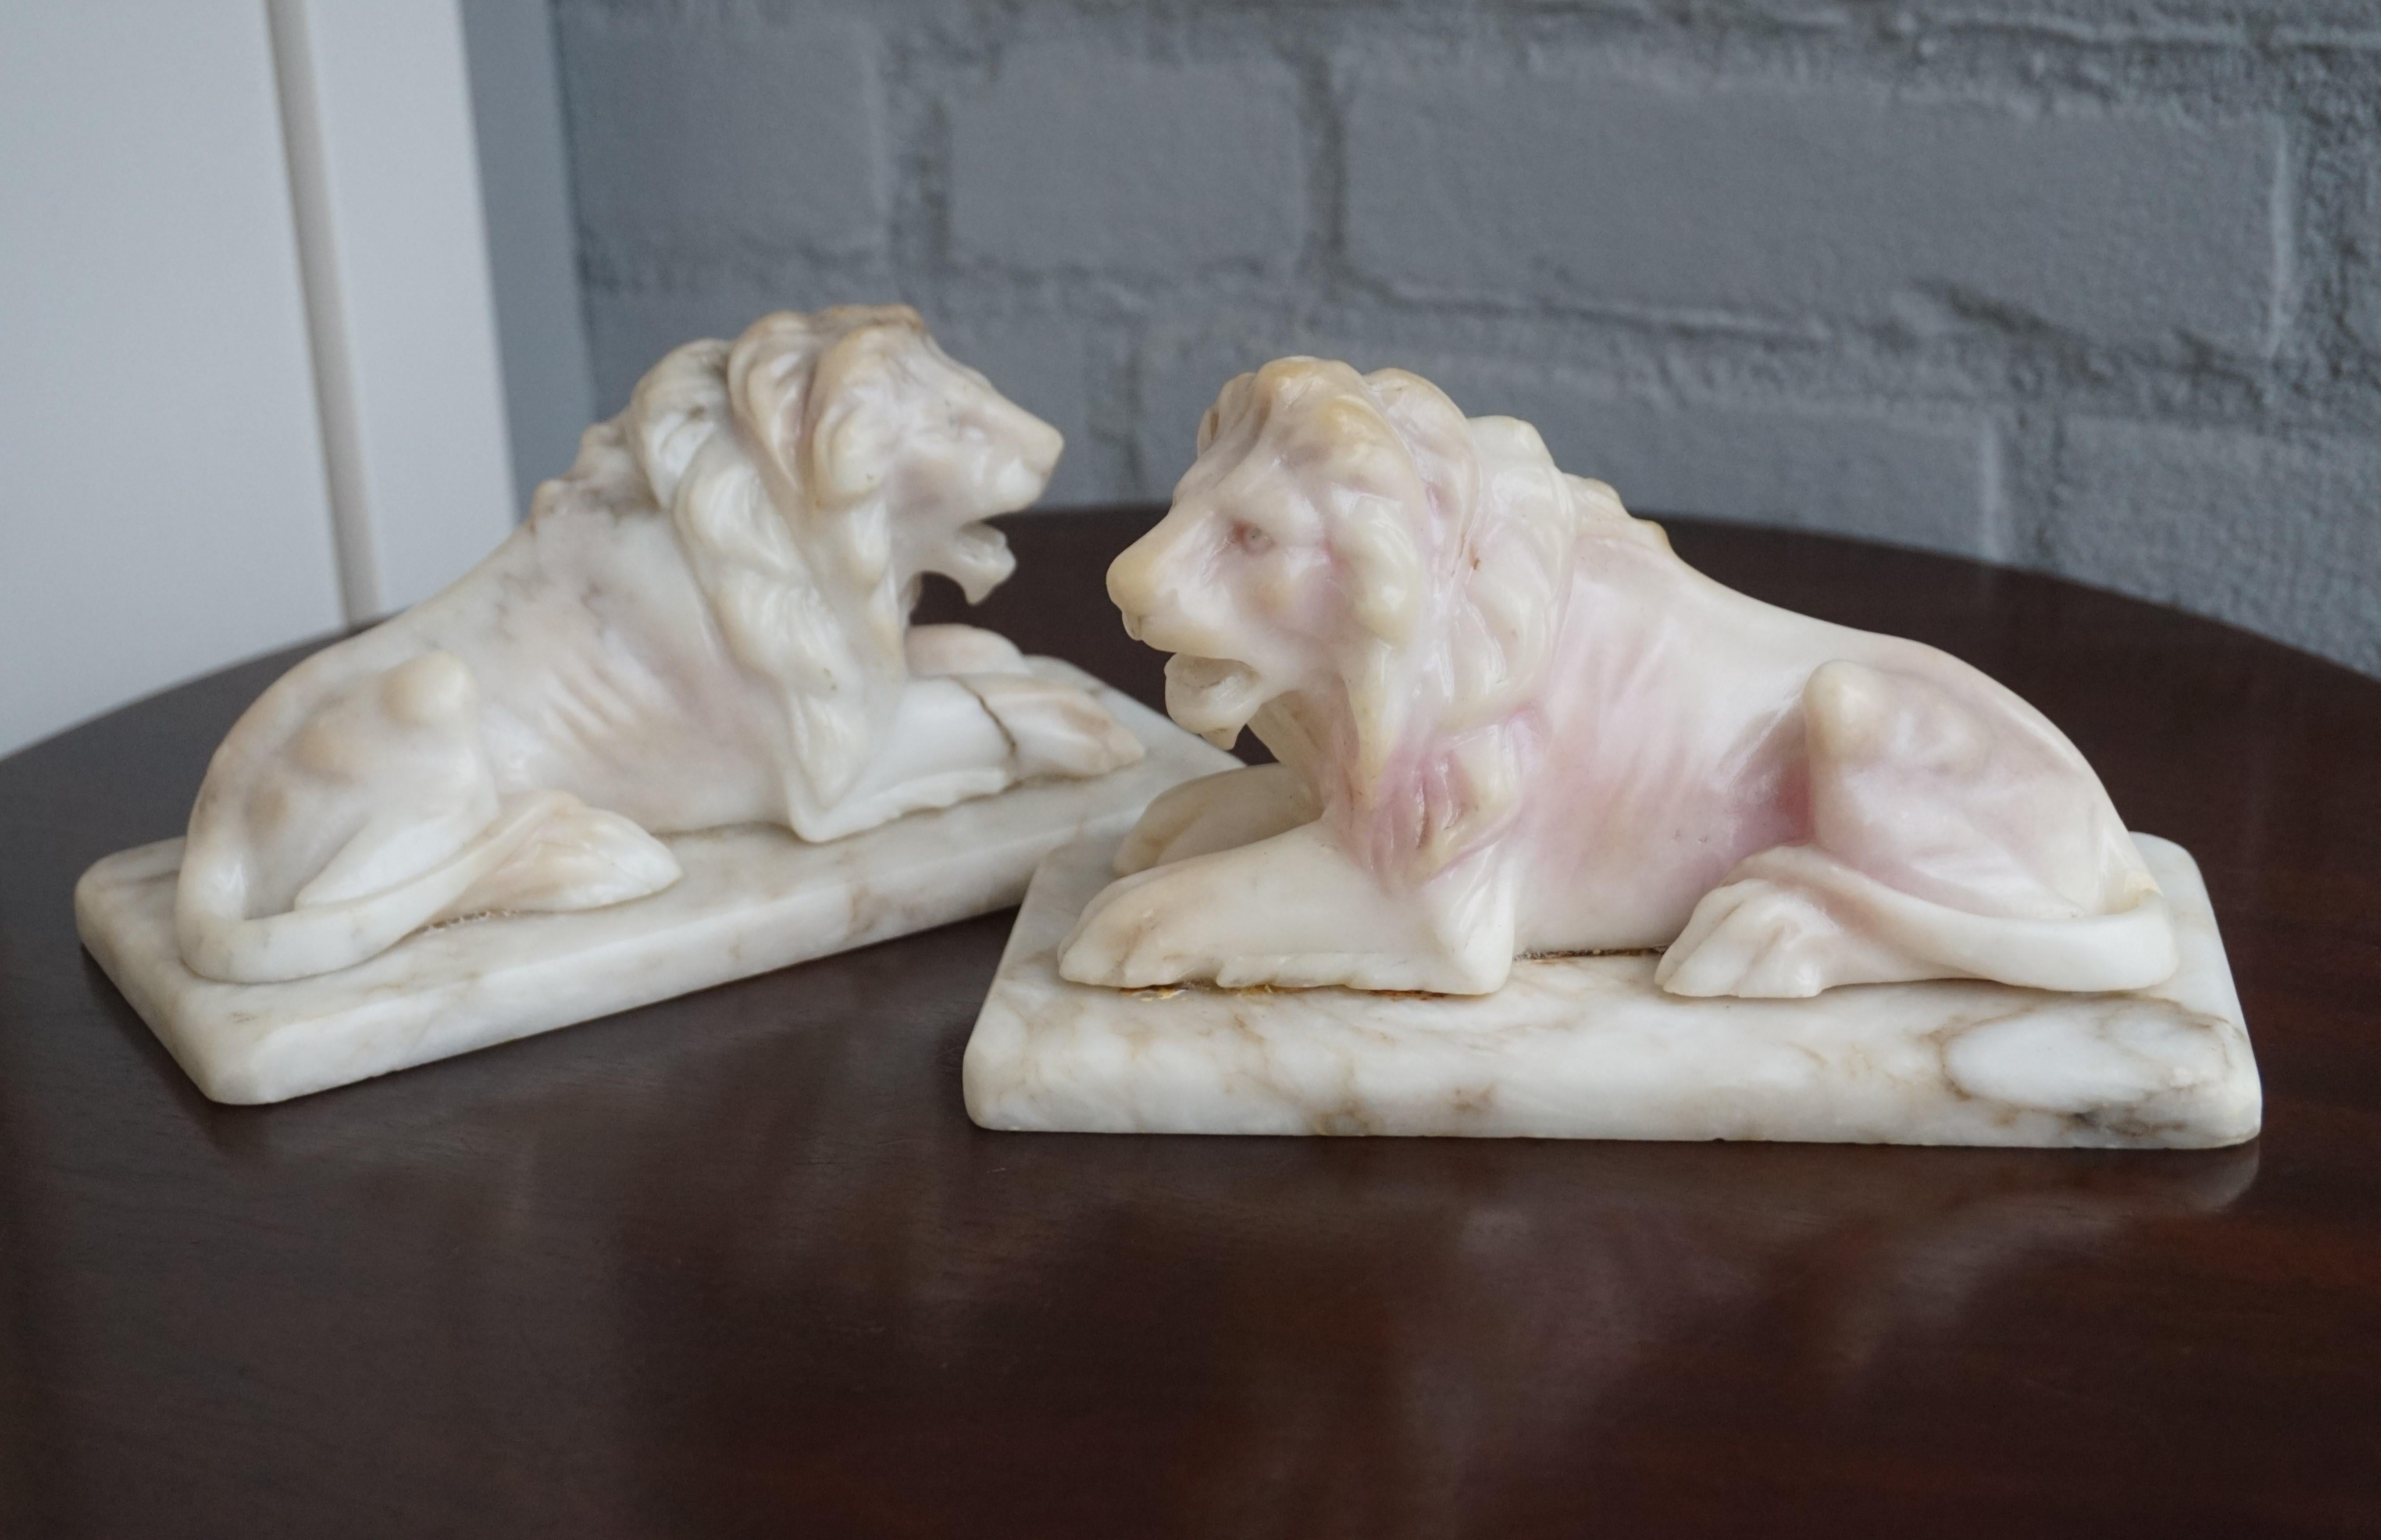 Rare pair of highly decorative and all handcrafted lion sculptures.

If you are a lion enthousiast and/or a collector of rare and handcrafted works of art then these 1920s lion sculptures could be flying your way very soon. Anyone who has ever seen